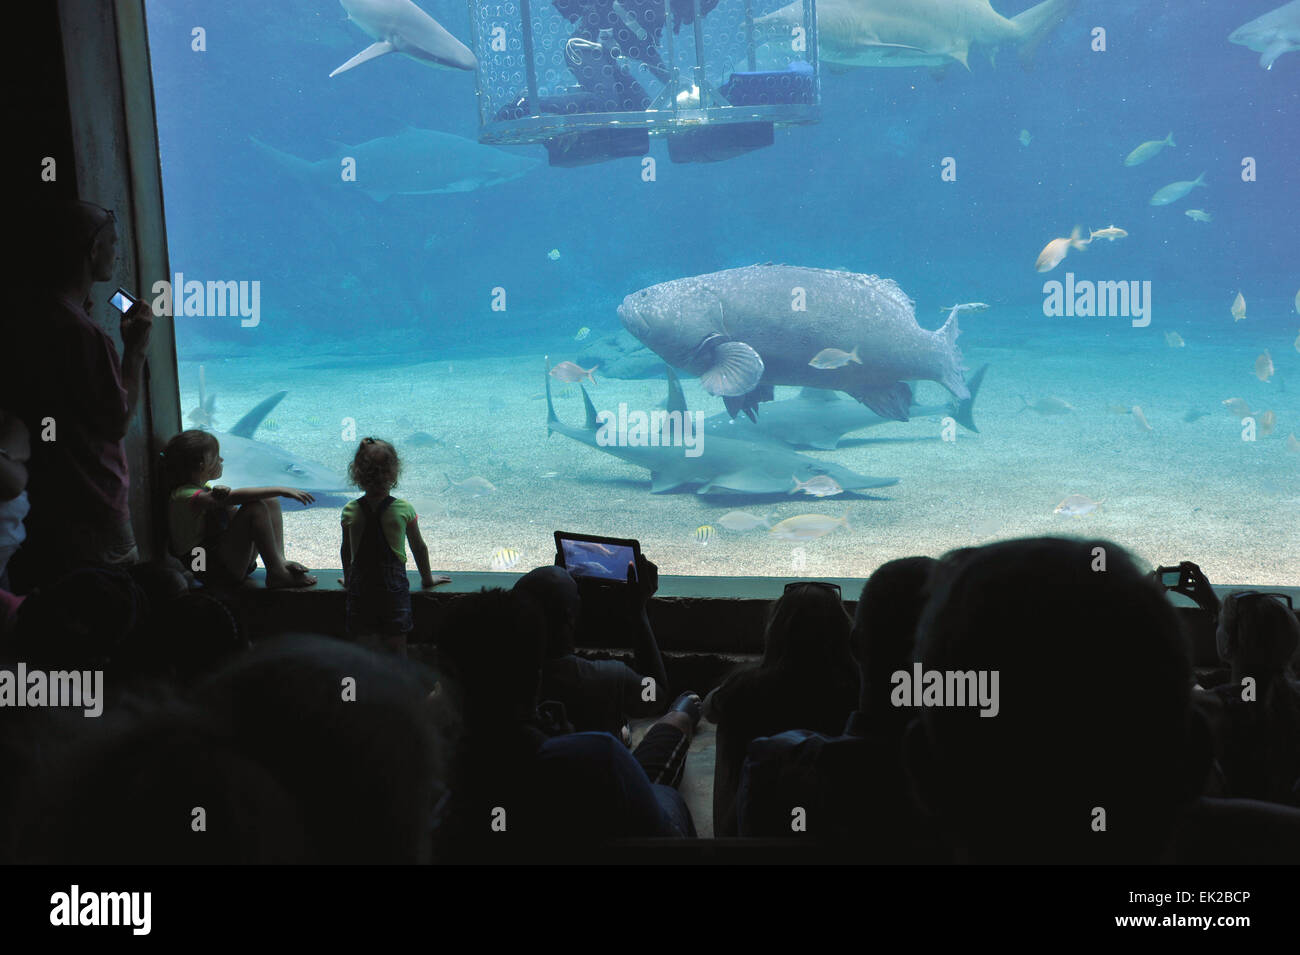 Group of adults and children watching diver feed sharks and Brindle Bass at uShaka Marine World aquarium, Durban, South Africa Stock Photo